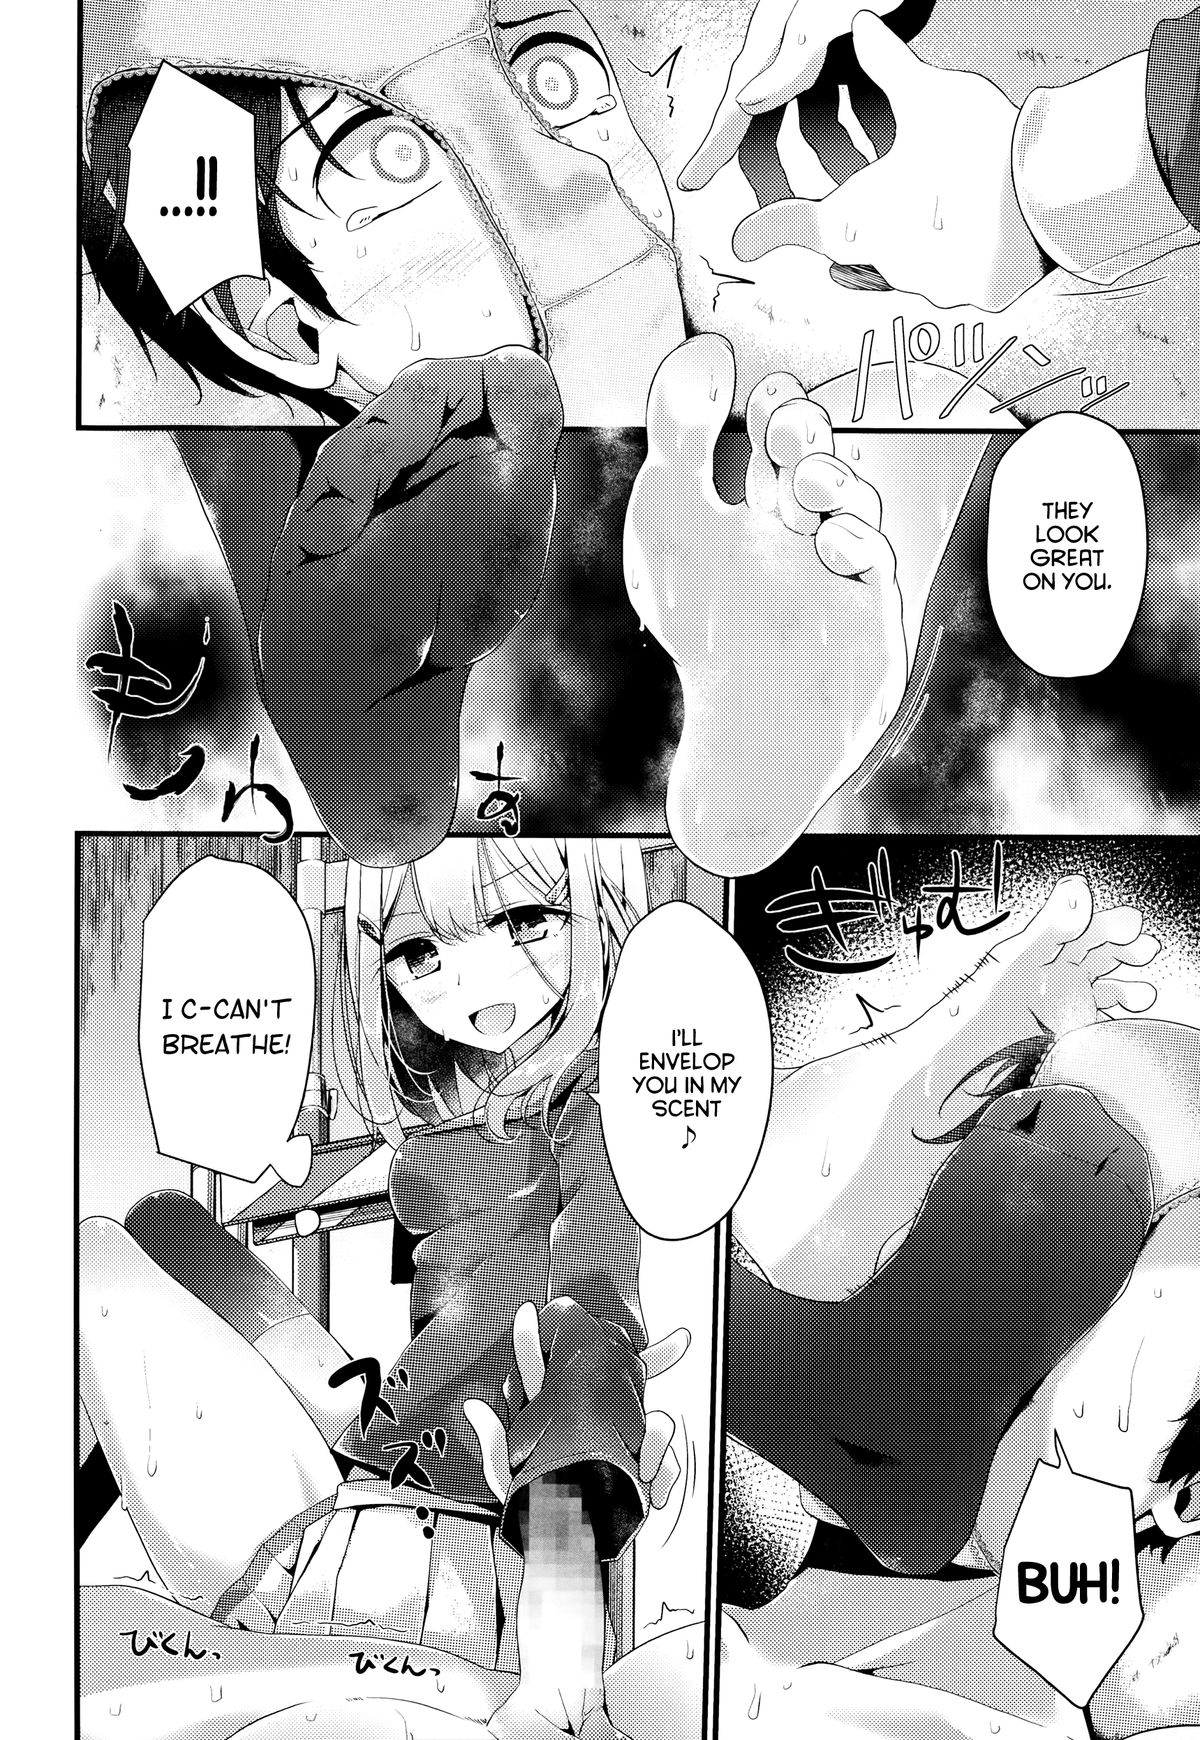 [Oouso] Olfactophilia (Girls forM Vol. 06) [English] =LWB= page 20 full